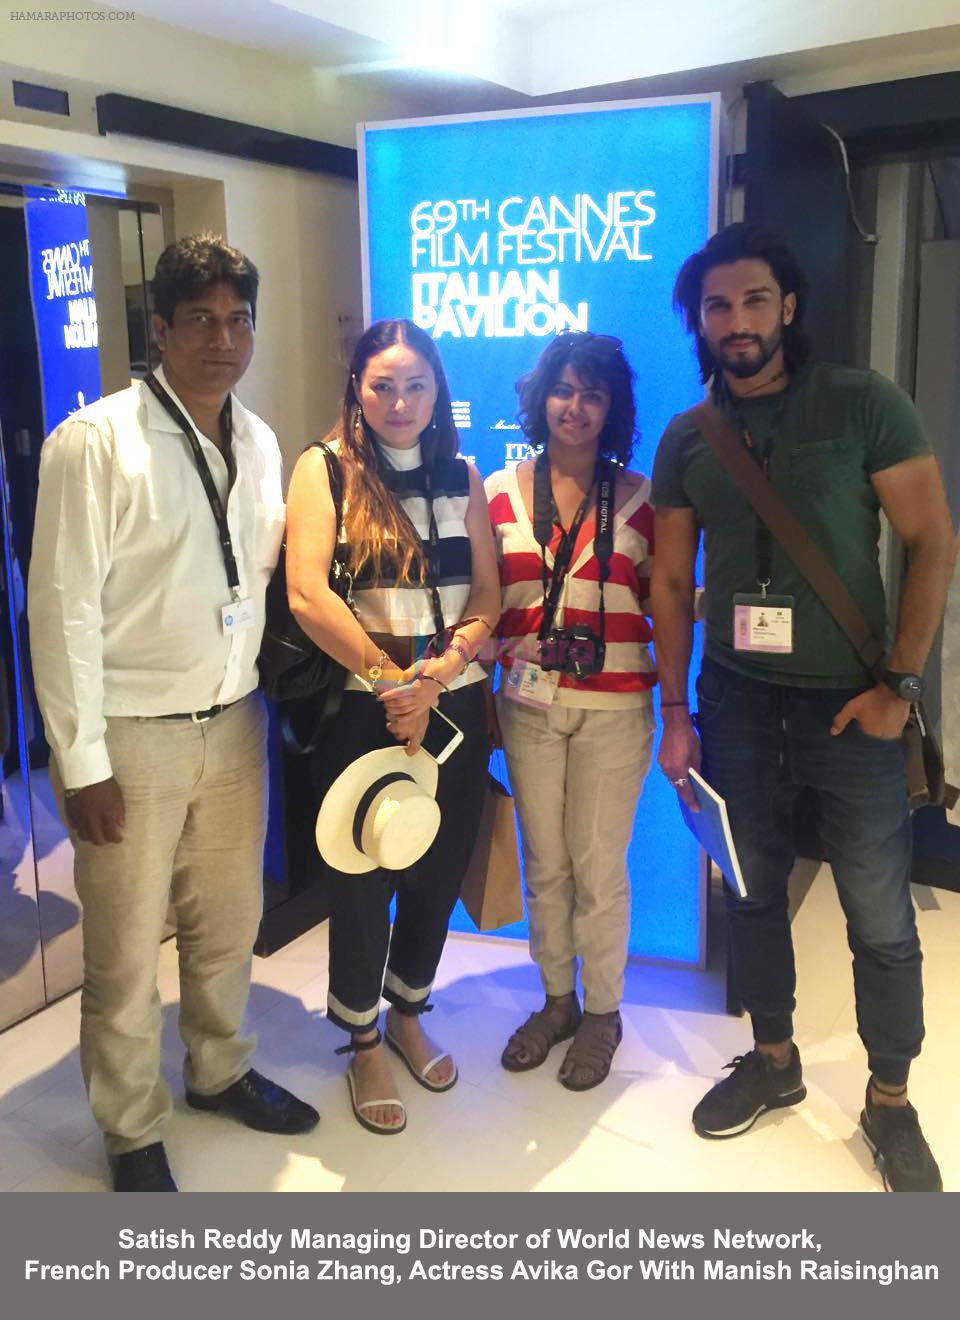 Satish Reddy Managing Director of World News Network, French Producer Sonia Zhang, Actress Avika Gor With Manish Raisinghan